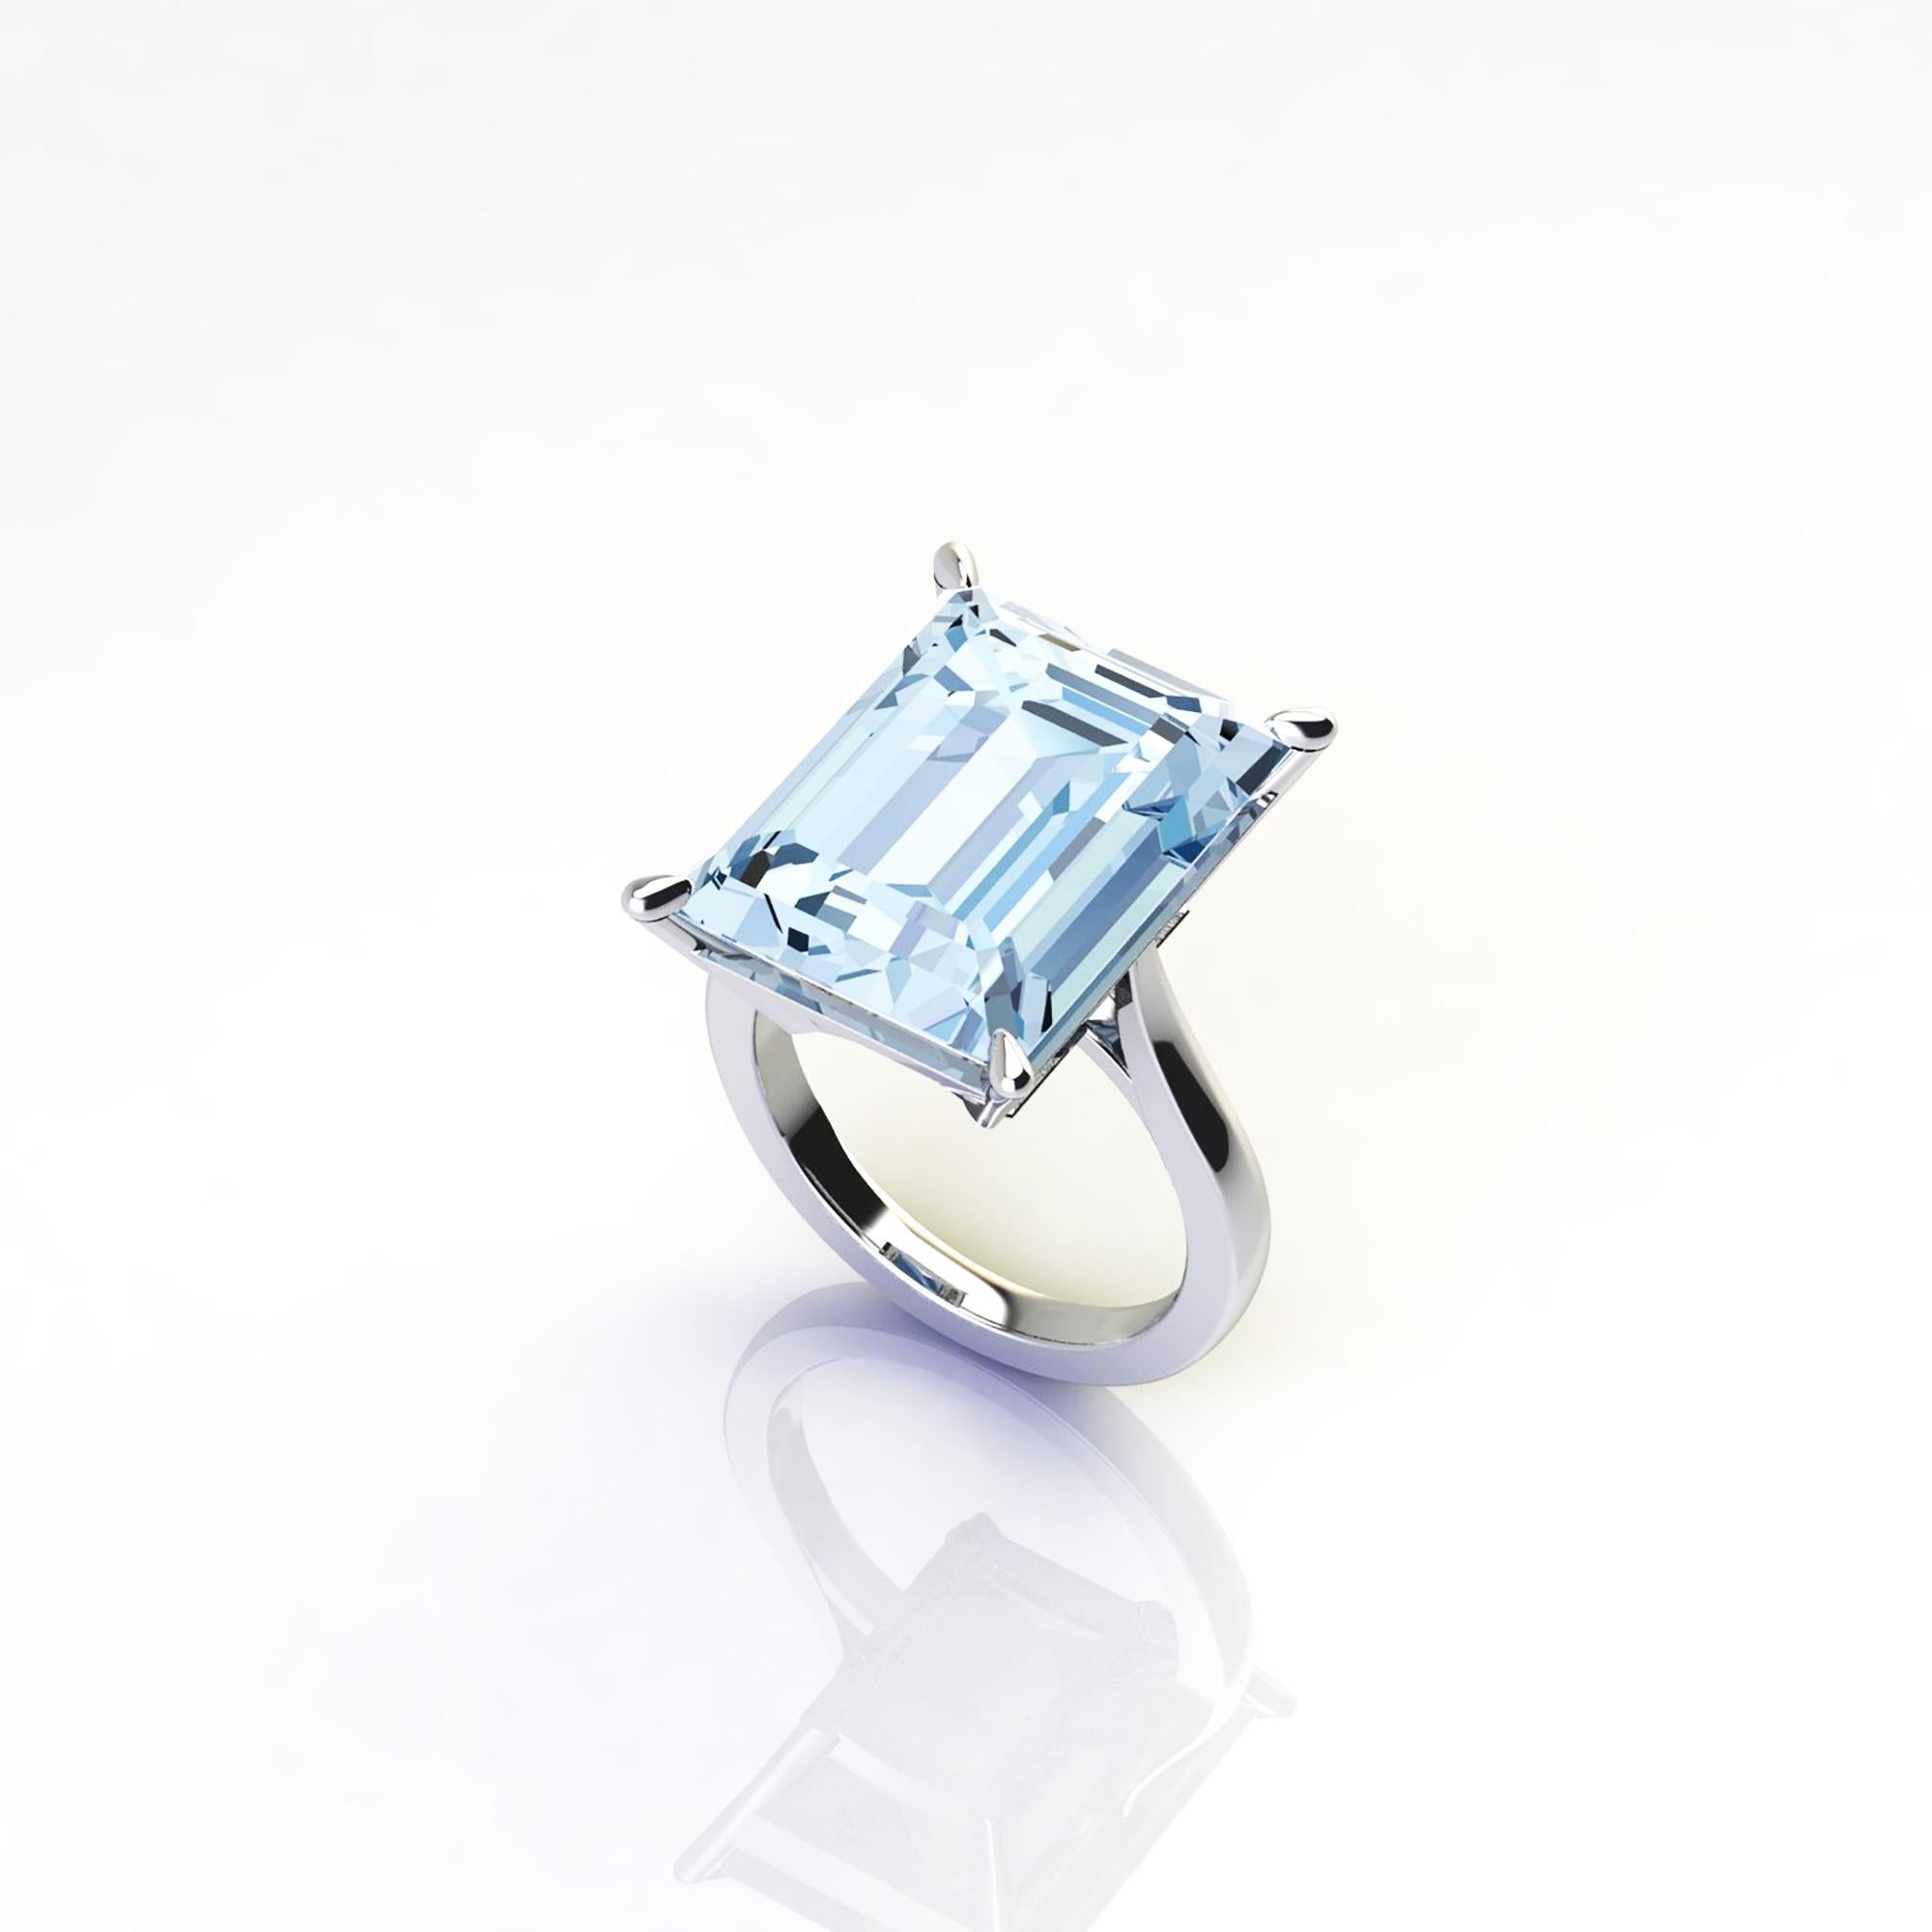 12.46 carat aquamarine, emerald set in an hand crafted, delicate and sophisticated looking Platinum 950 ring, manufactured with the best Italian manufacturing.
Complimentary GIA Certificate
Each ring is made to order to perfectly fit the Gemstone